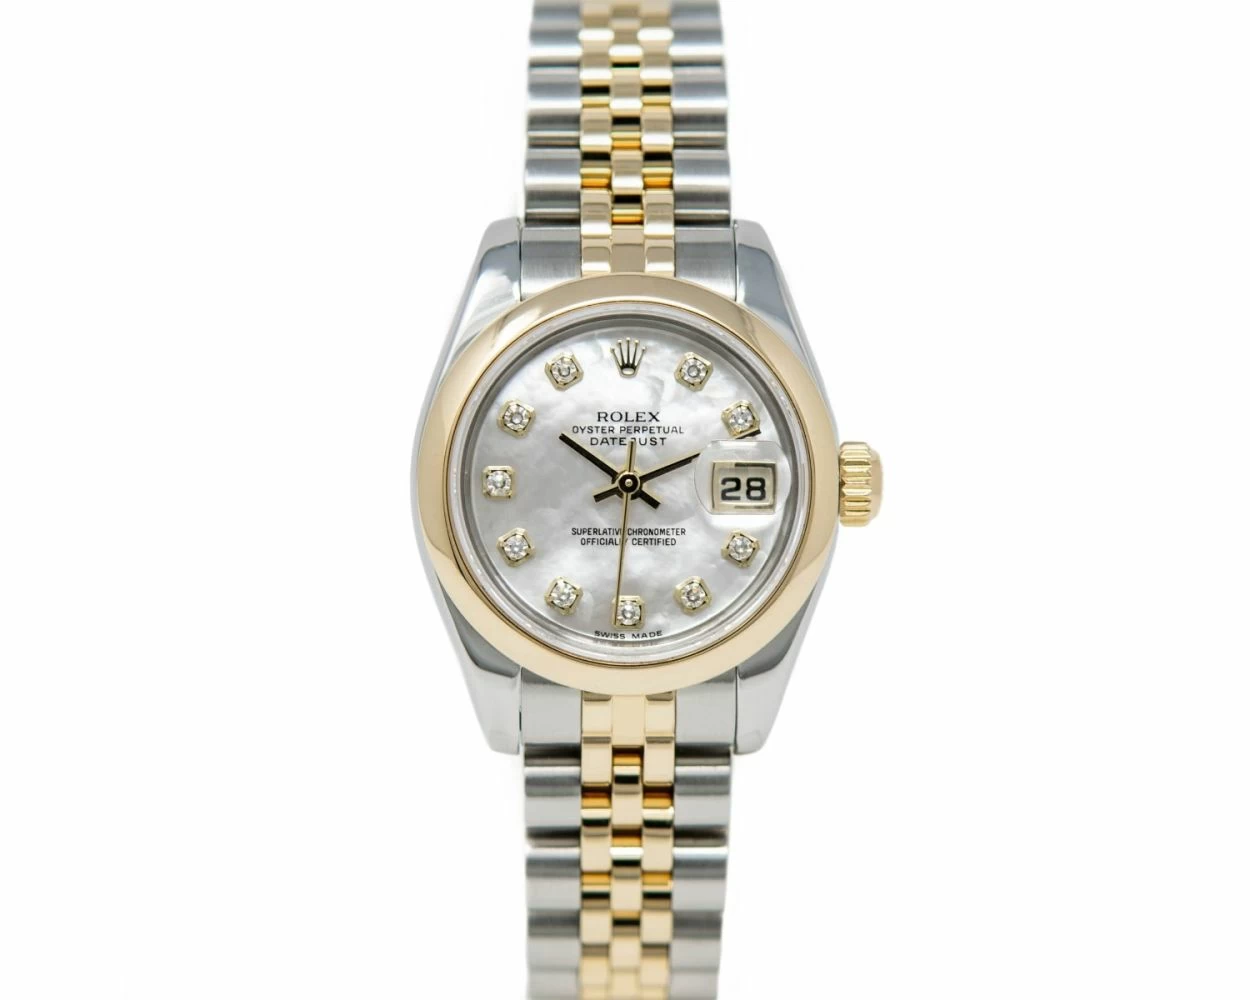 Rolex Lady-Datejust, Mother of Pearl Diamond Dial, Steel & Gold, 179163